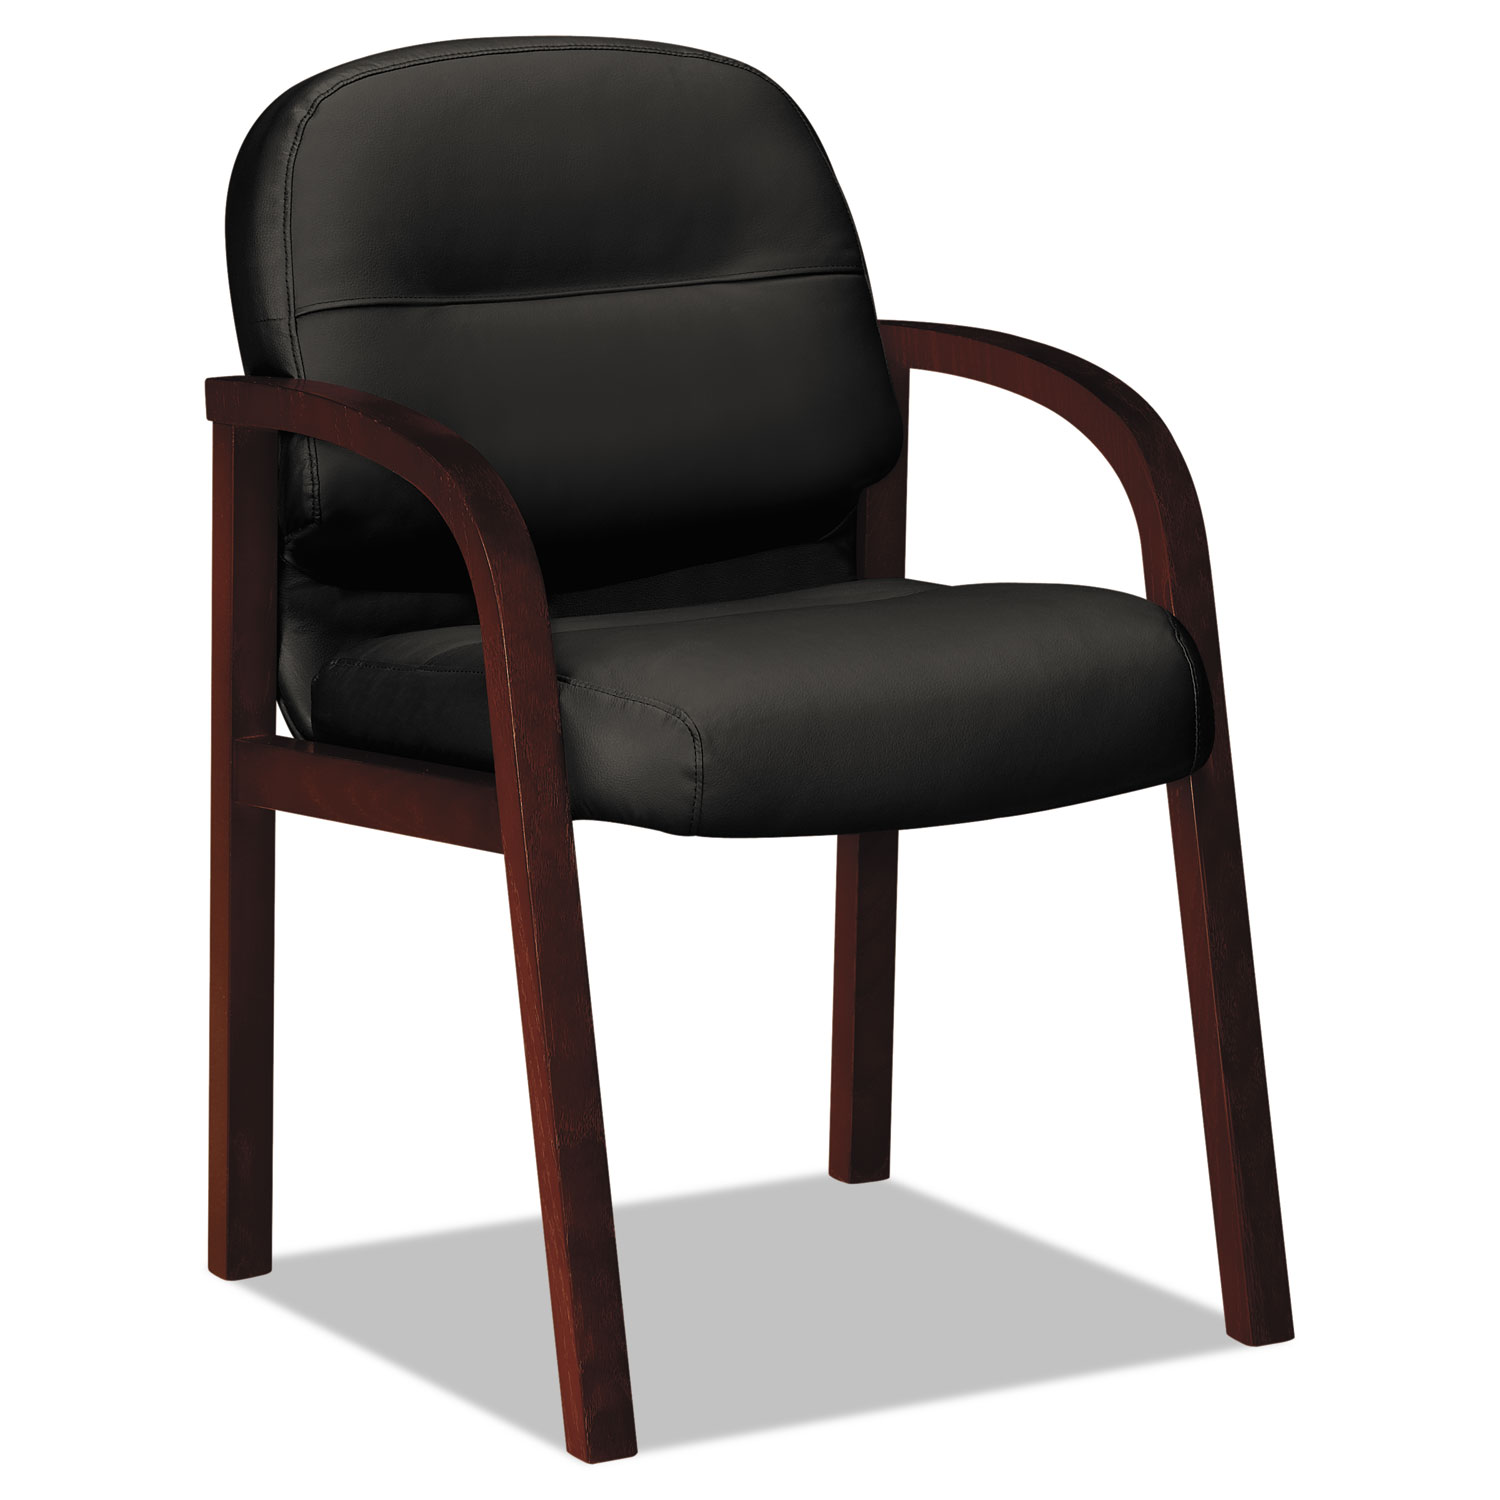 2190 Pillow-Soft Wood Series Guest Arm Chair, Mahogany/Black Leather